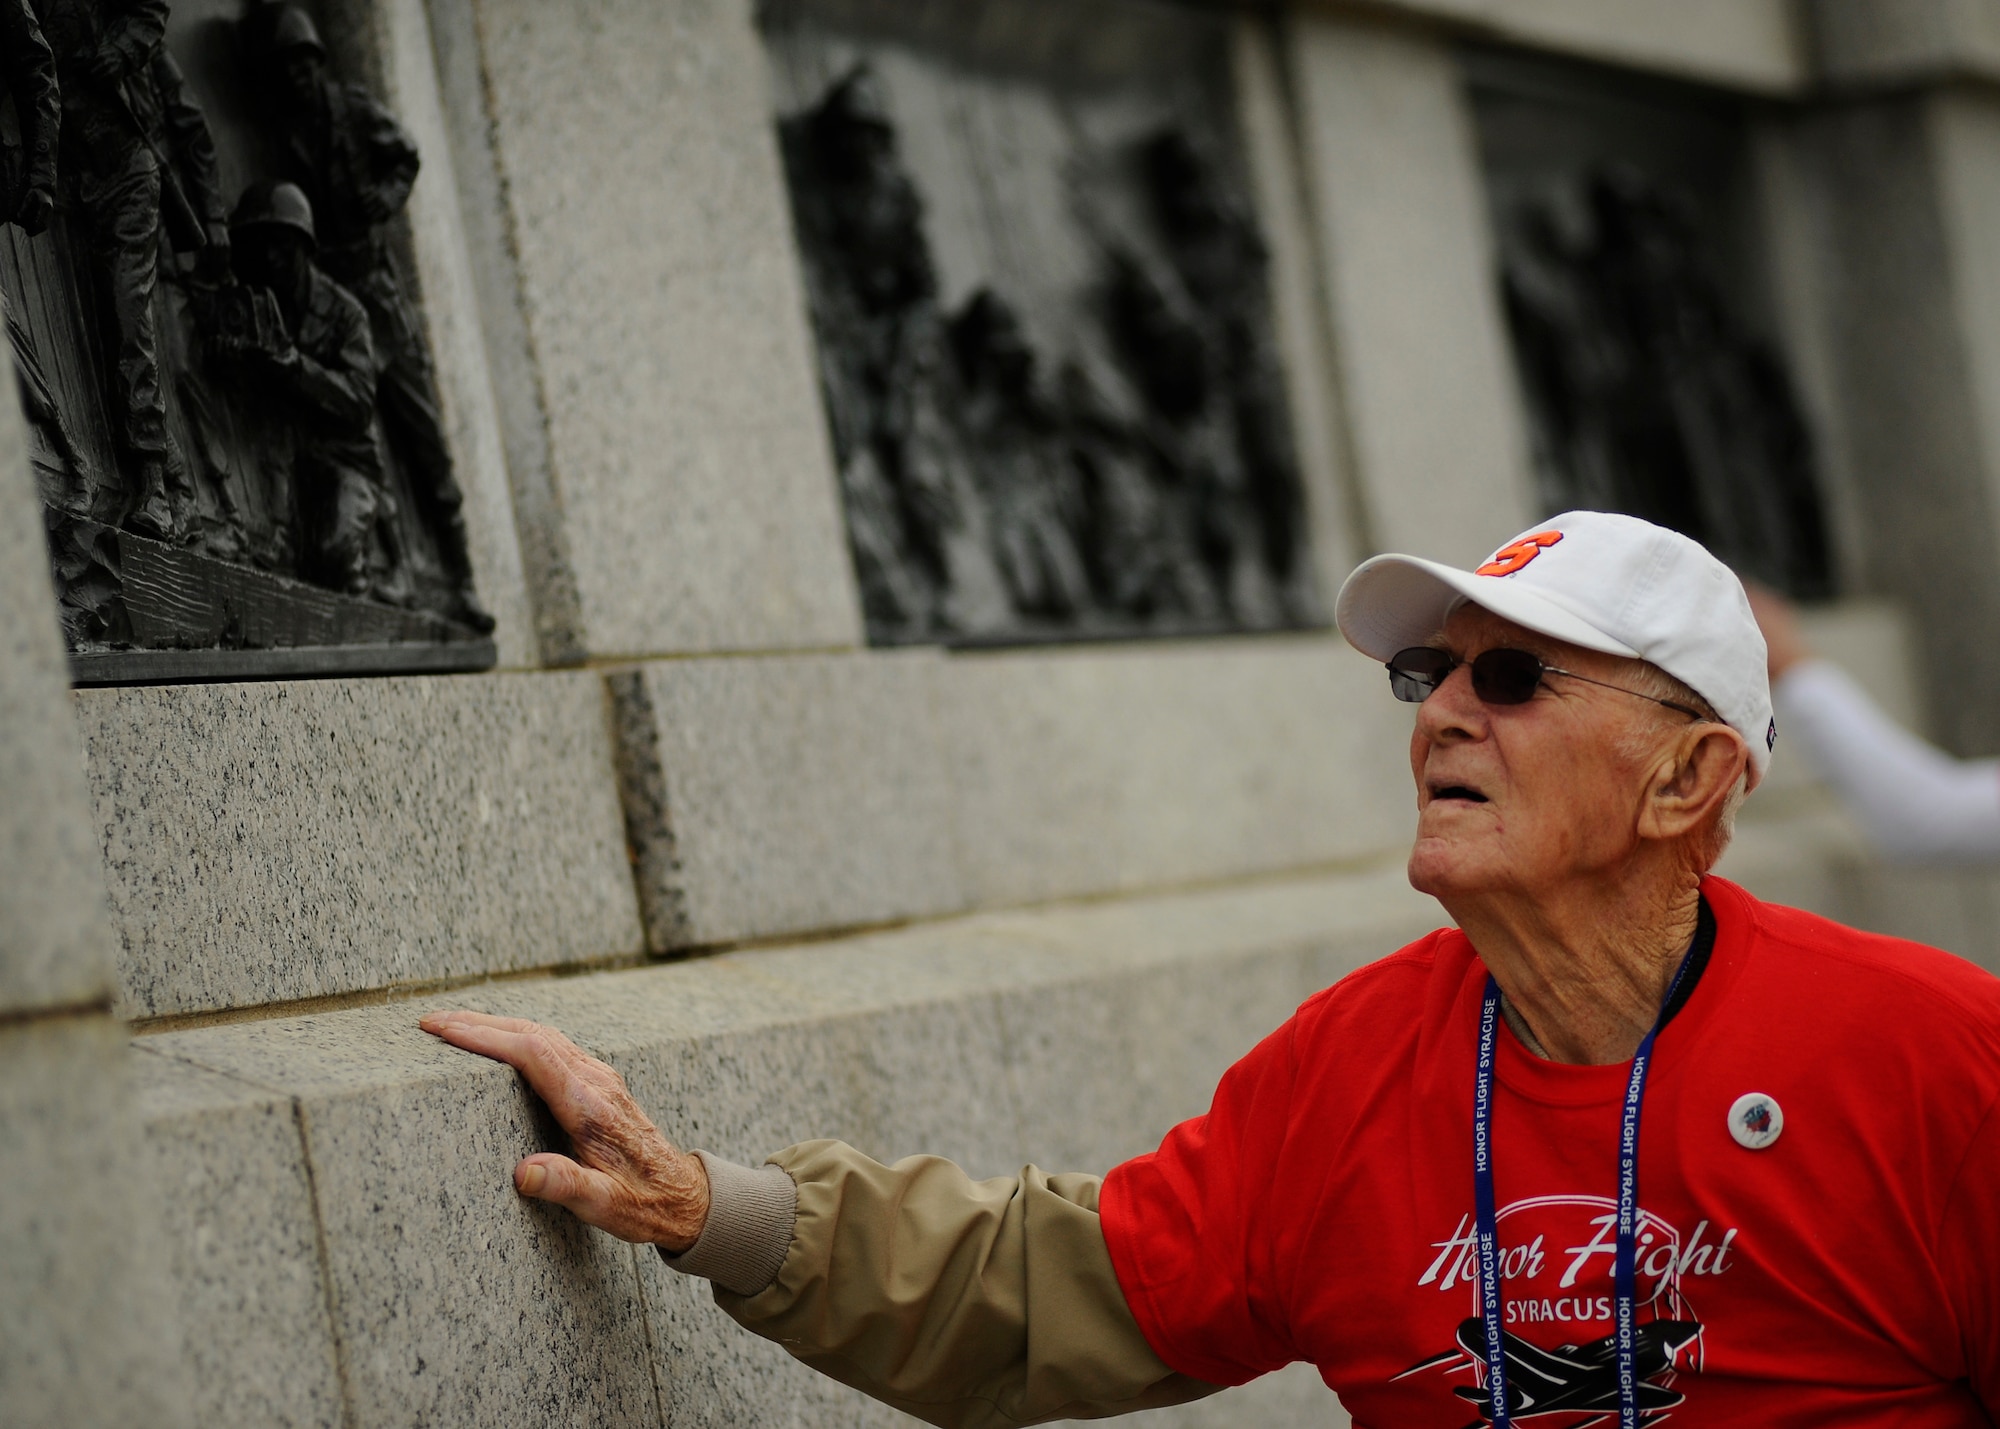 Service members and civilians thank World War II veterans for their service at the National World War II Memorial in Washington, D.C., during an Honor Flight ceremony April 30, 2016. The Honor Flight Network is a nonprofit organization dedicated to transporting America’s veterans to the nation’s capital to visit the memorials. (U.S. Air Force photo/Tech. Sgt. Bryan Franks)